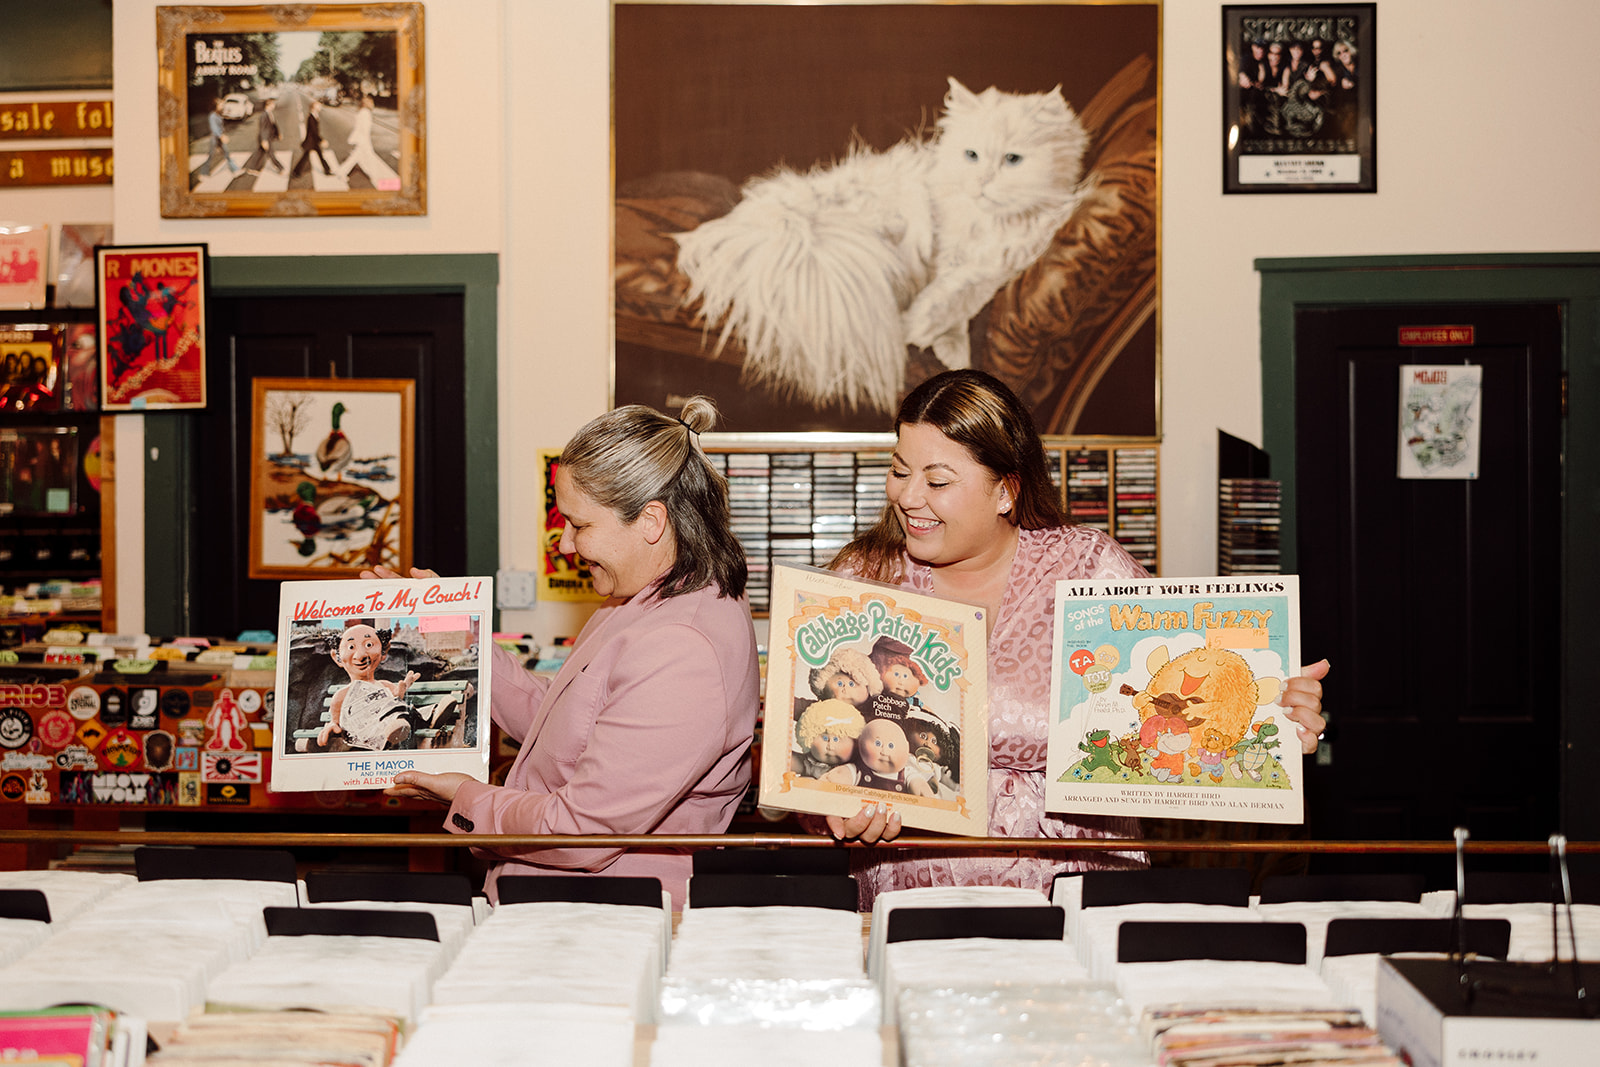 Women showing records to each other at a record shop during their city engagment session